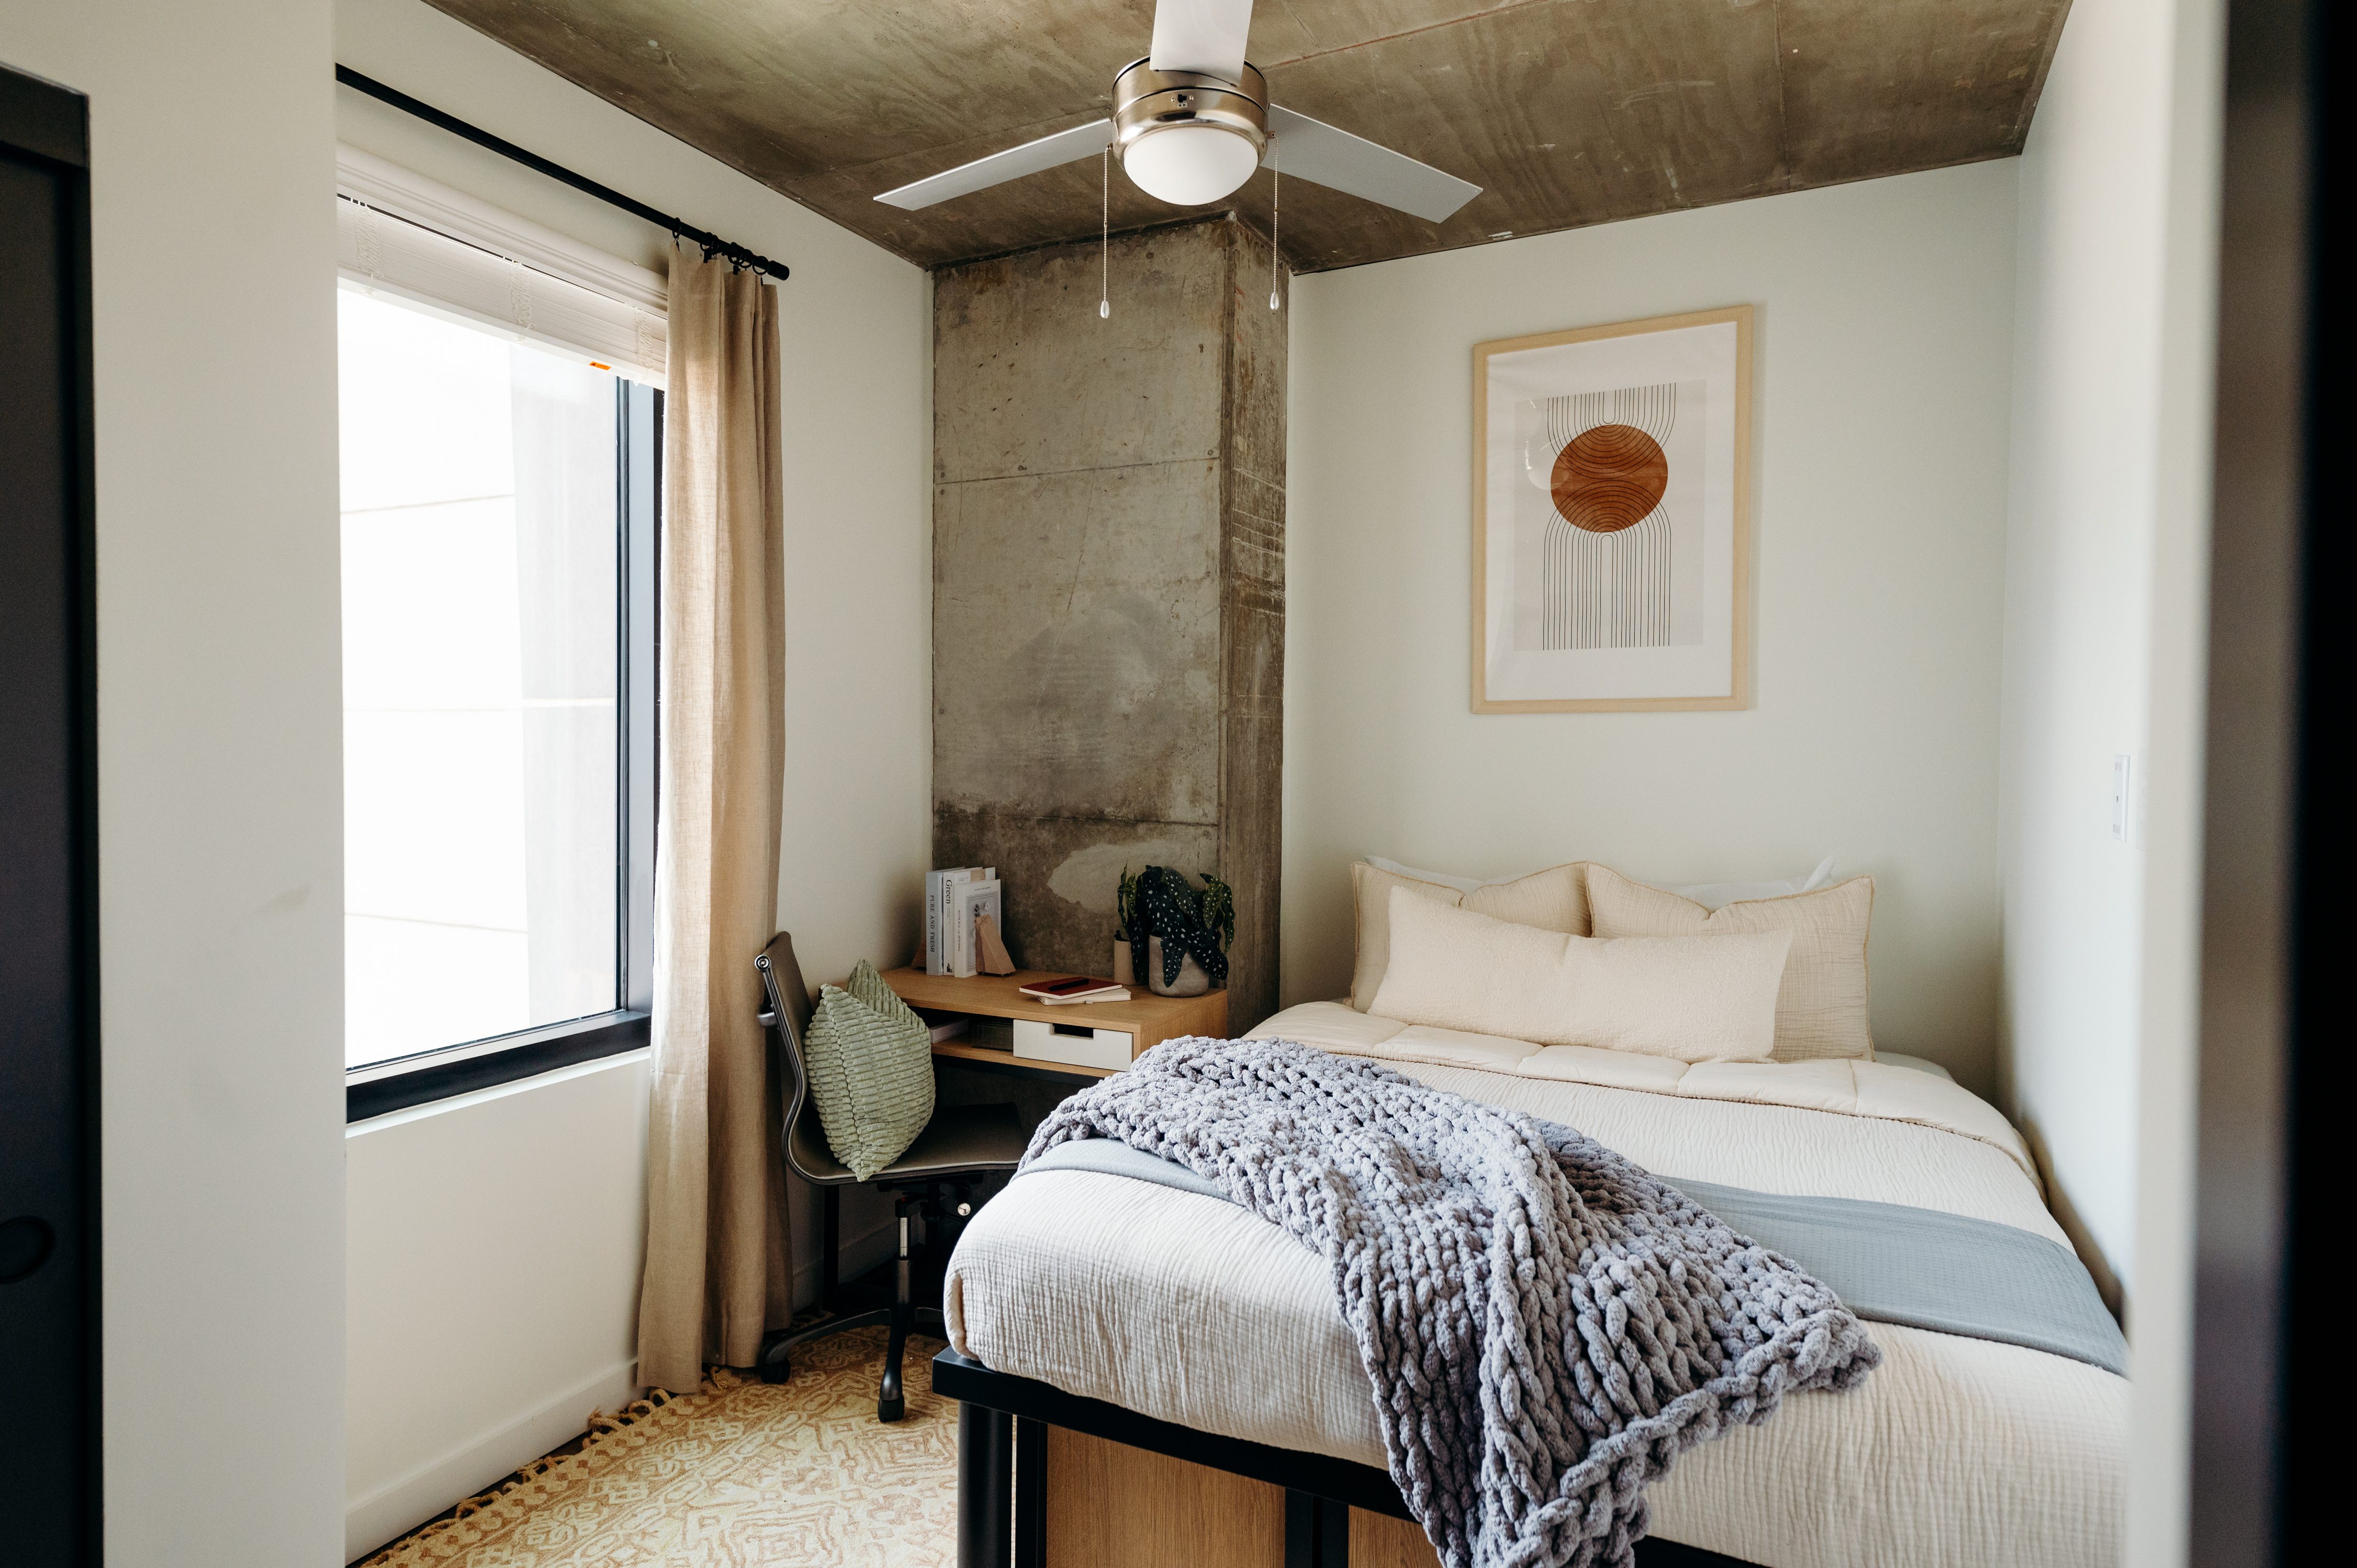 Image of the interior of a bedroom at Whistler, a student housing apartment in Midtown Atlanta.